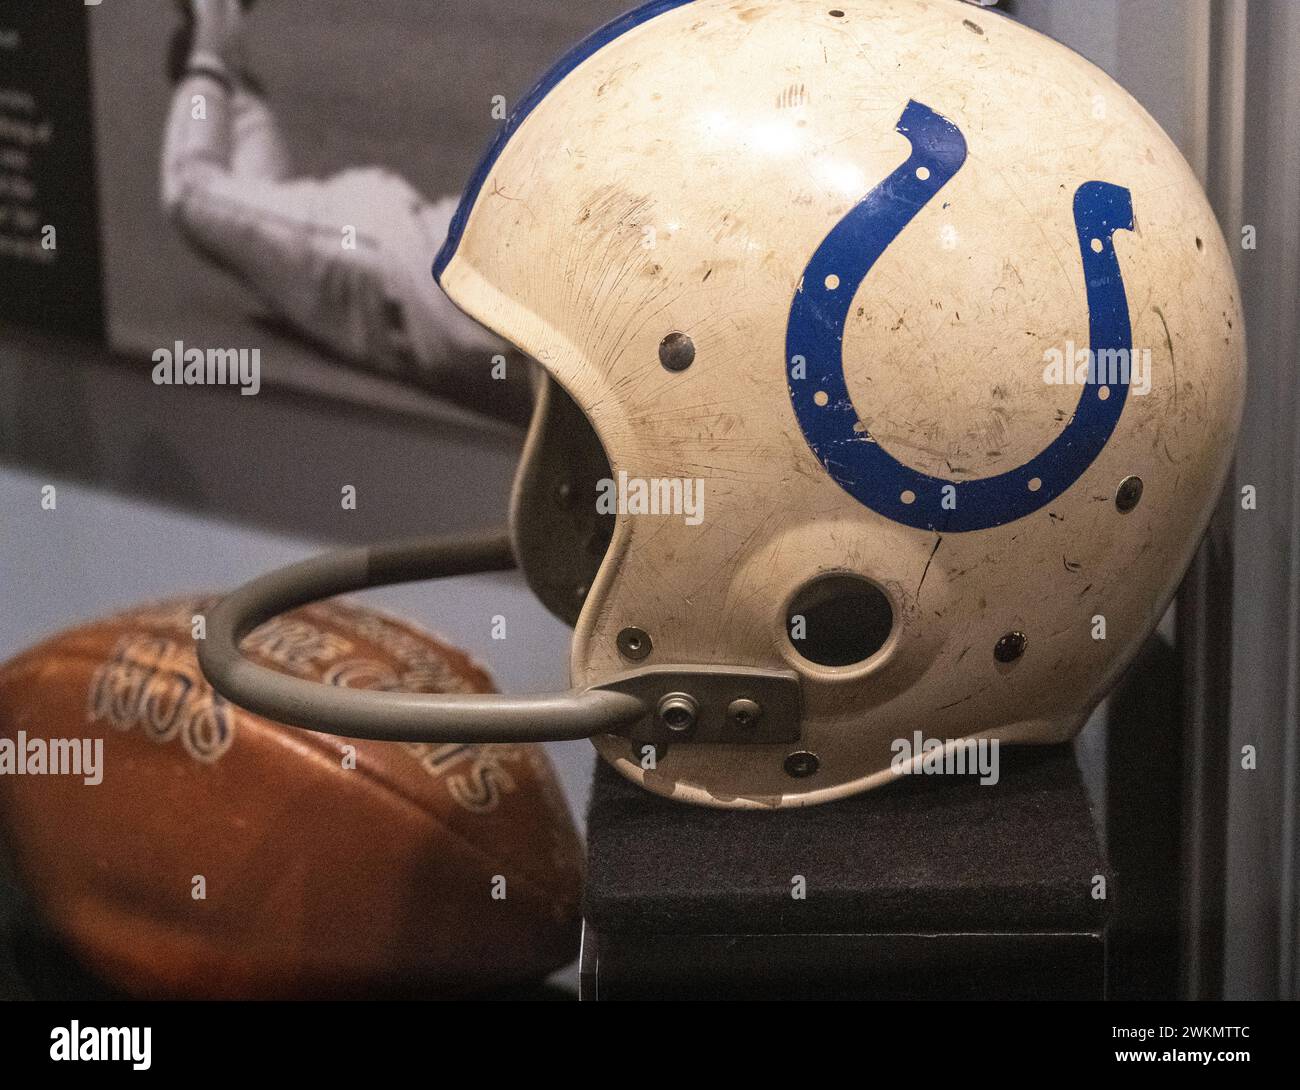 Johnny Unitas's single bar helmet with the Baltimore Colts, 1950s suspension helmet with little protection Stock Photo